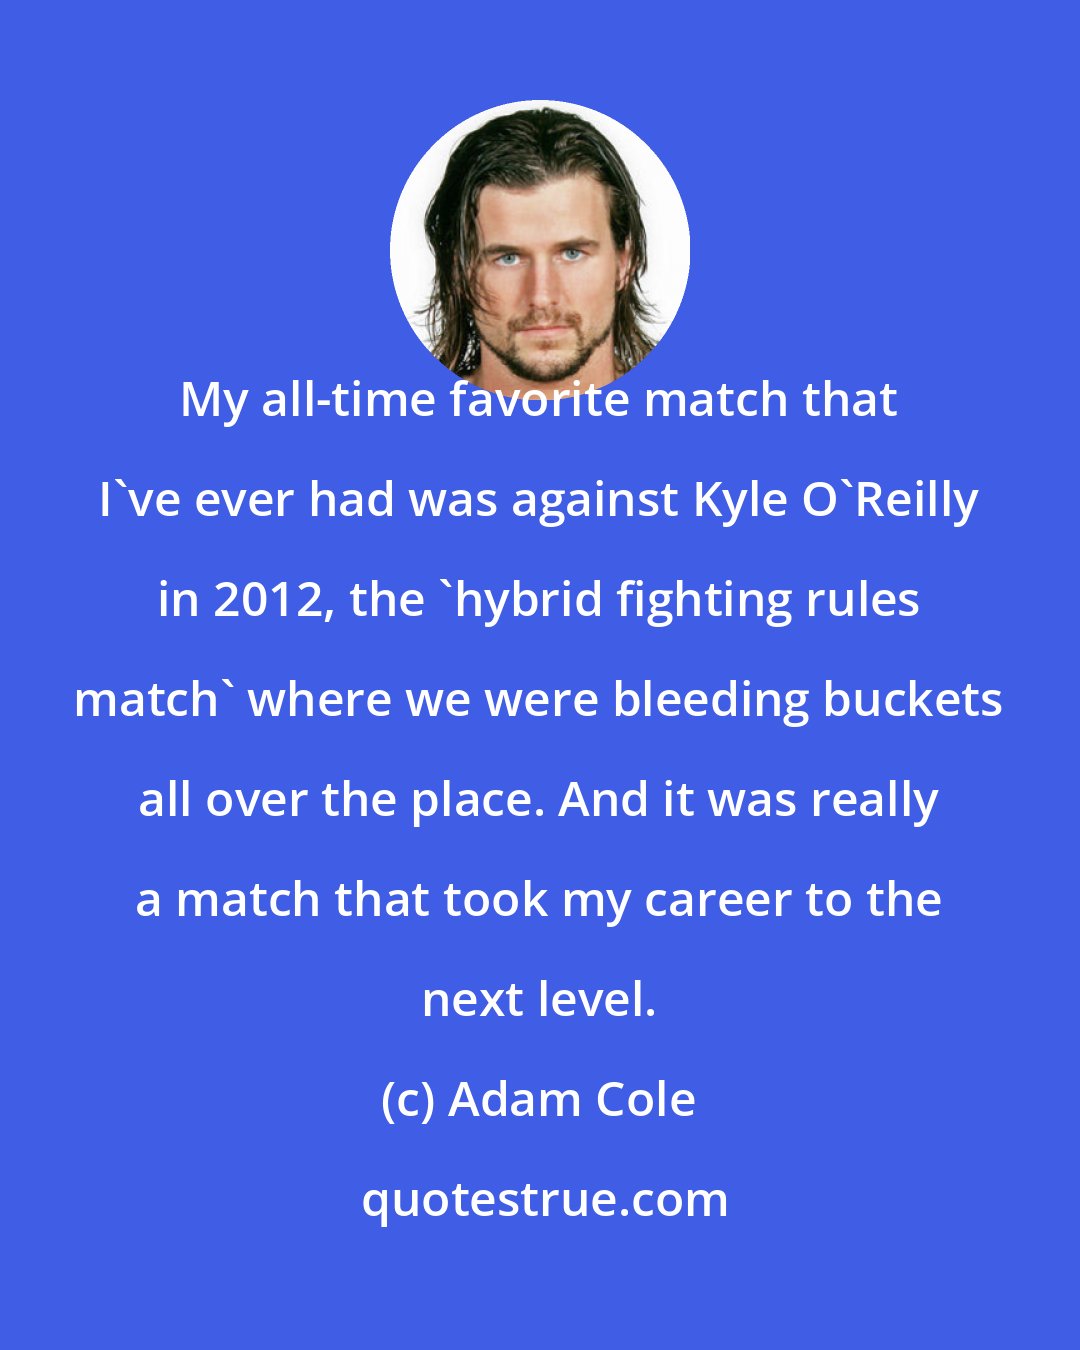 Adam Cole: My all-time favorite match that I've ever had was against Kyle O'Reilly in 2012, the 'hybrid fighting rules match' where we were bleeding buckets all over the place. And it was really a match that took my career to the next level.